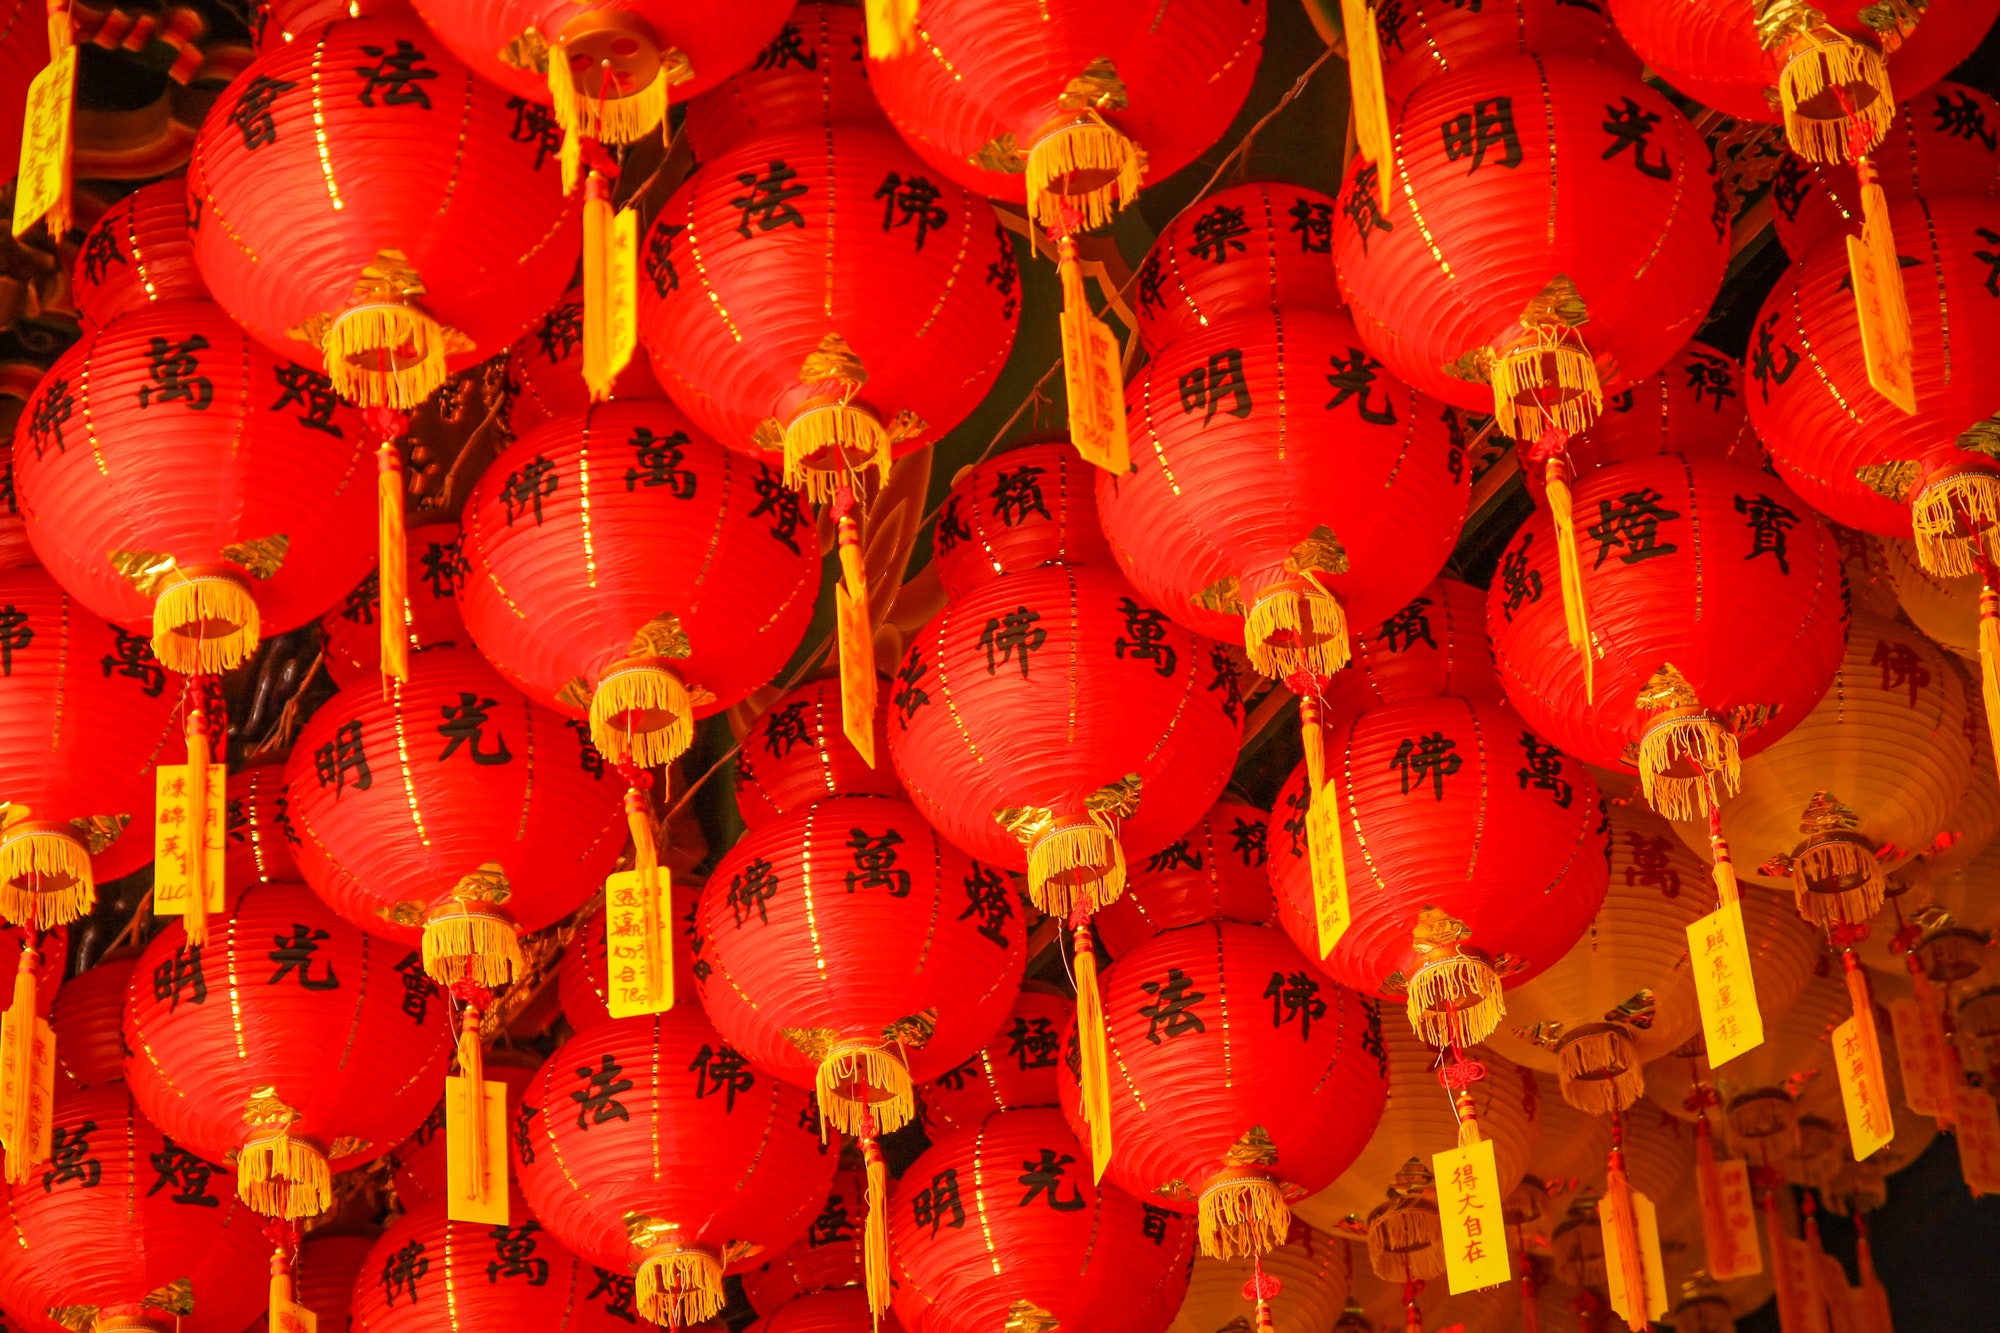 Red and Yellow Lanterns